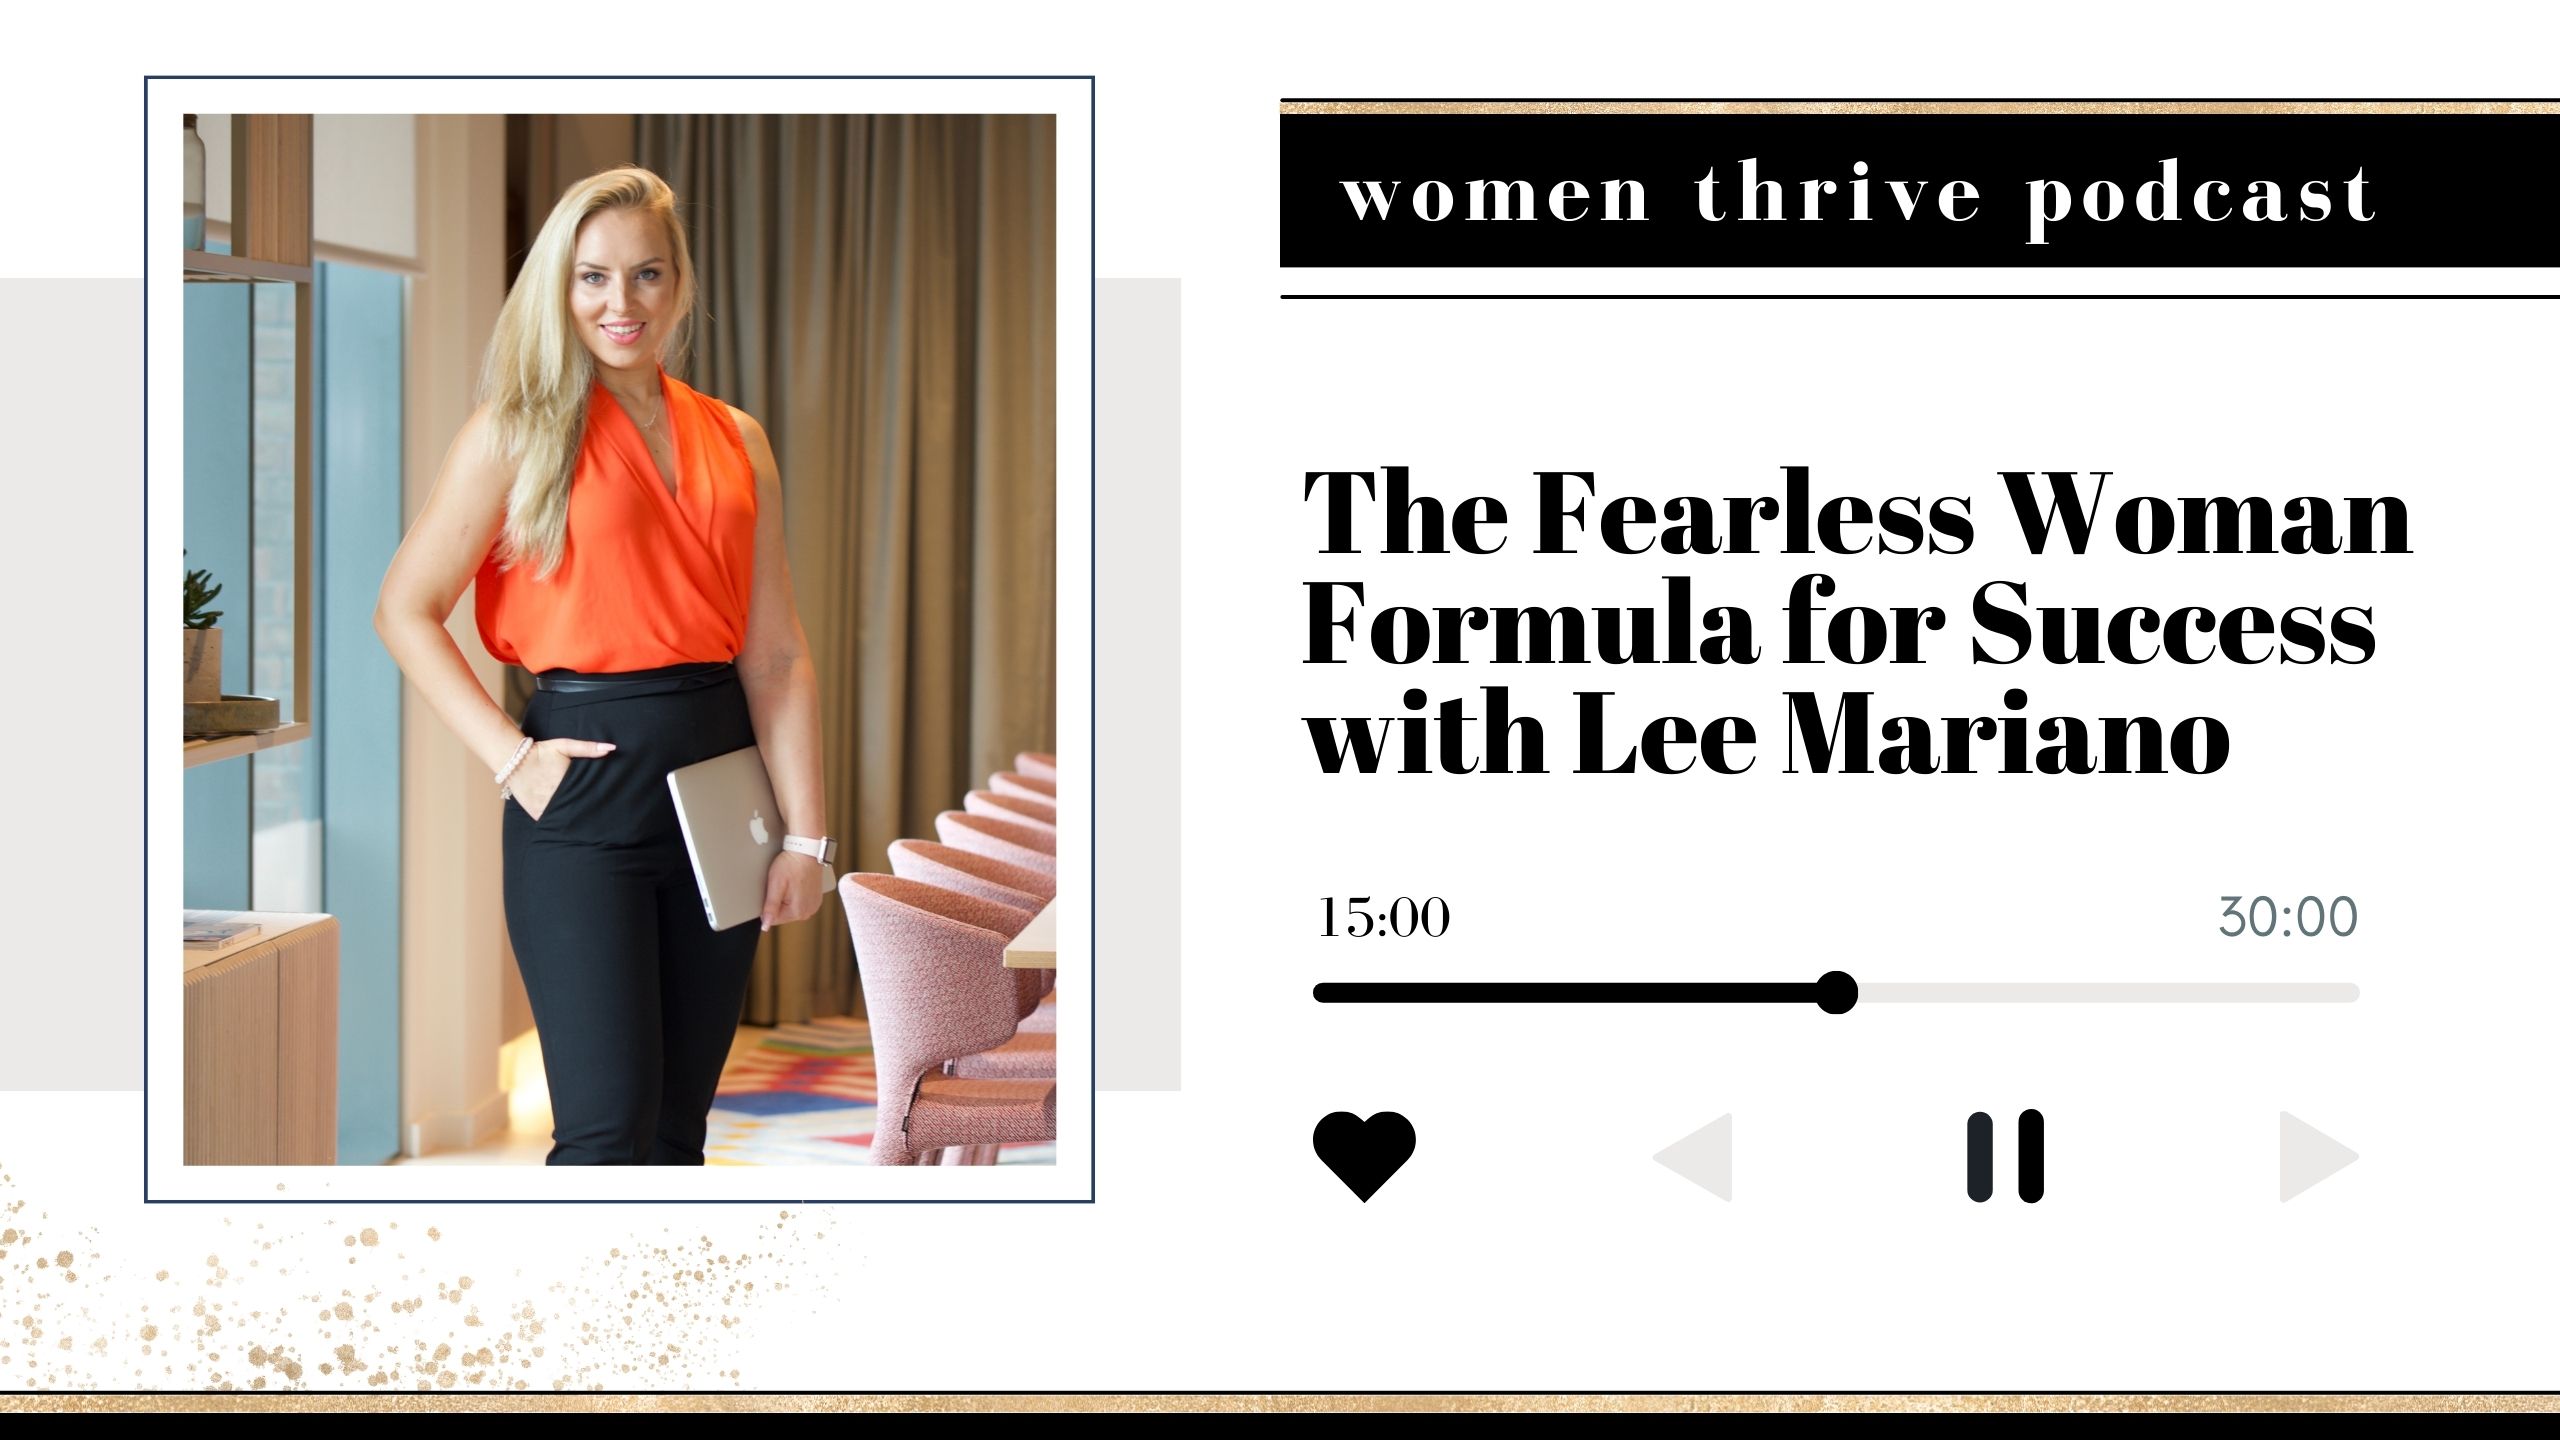 The Fearless Woman Formula for Success with Lee Mariano